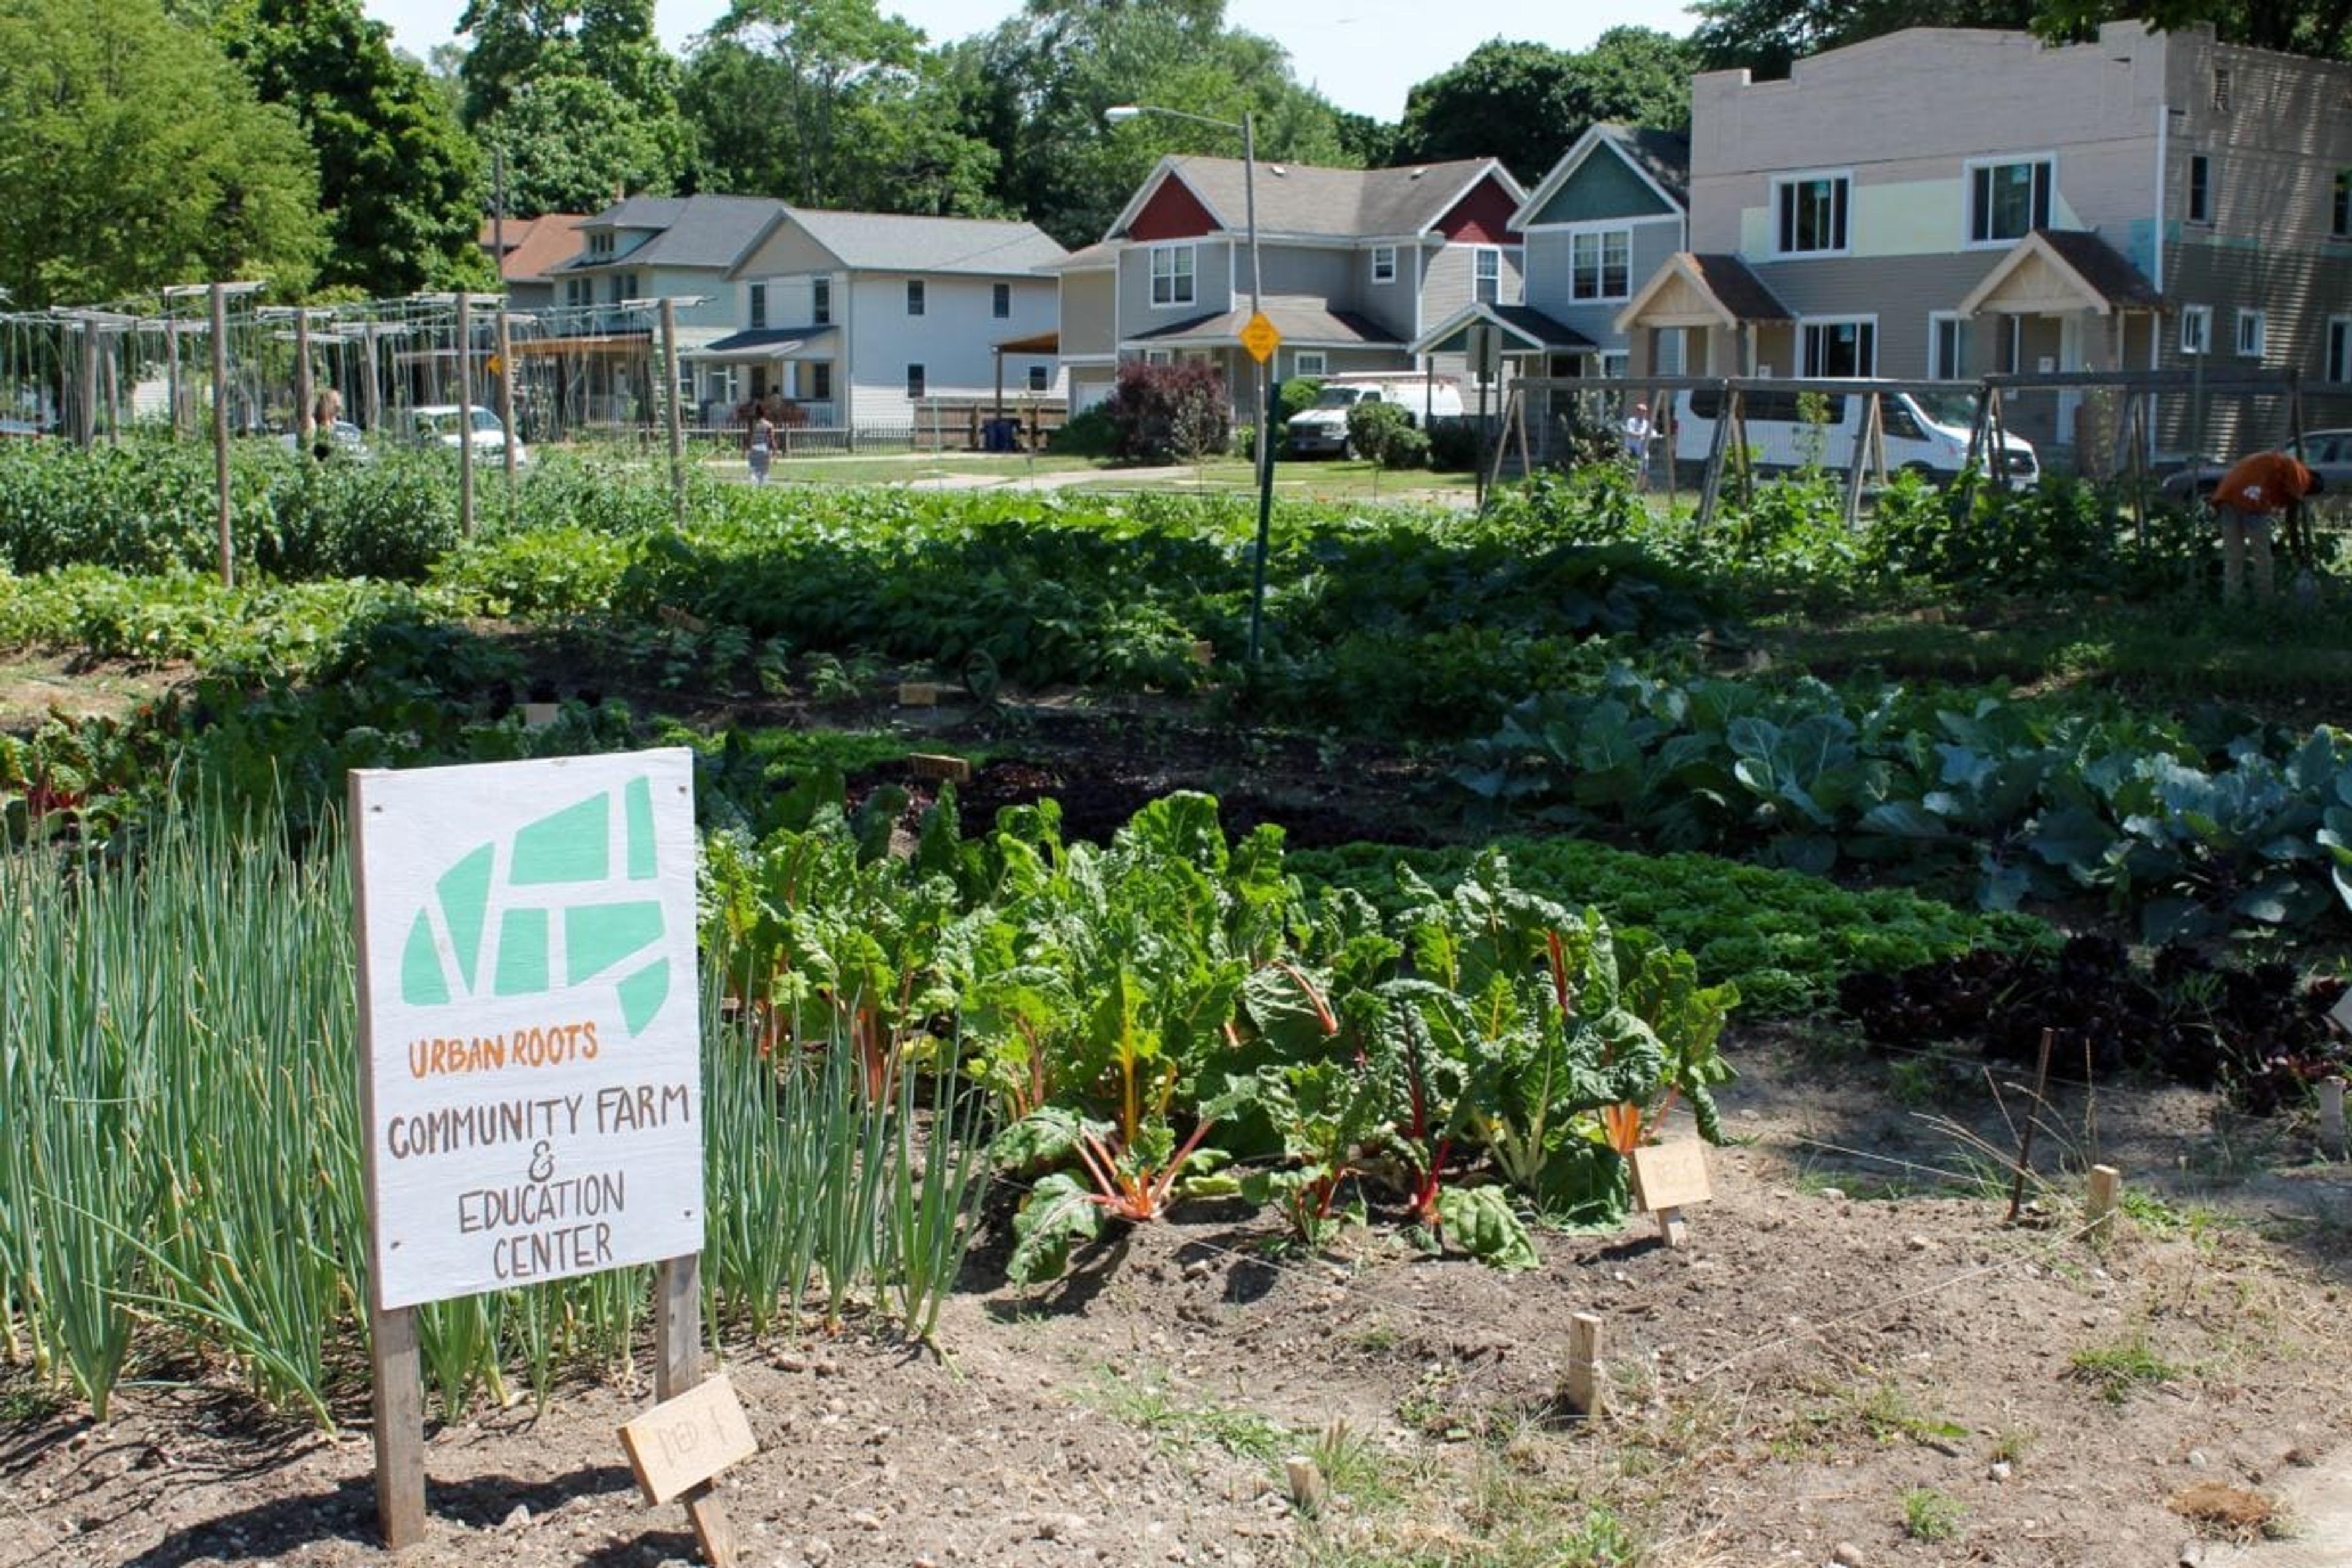 Growing field at Urban Roots with sign that reads "Urban Roots Community Farm & Education Center".